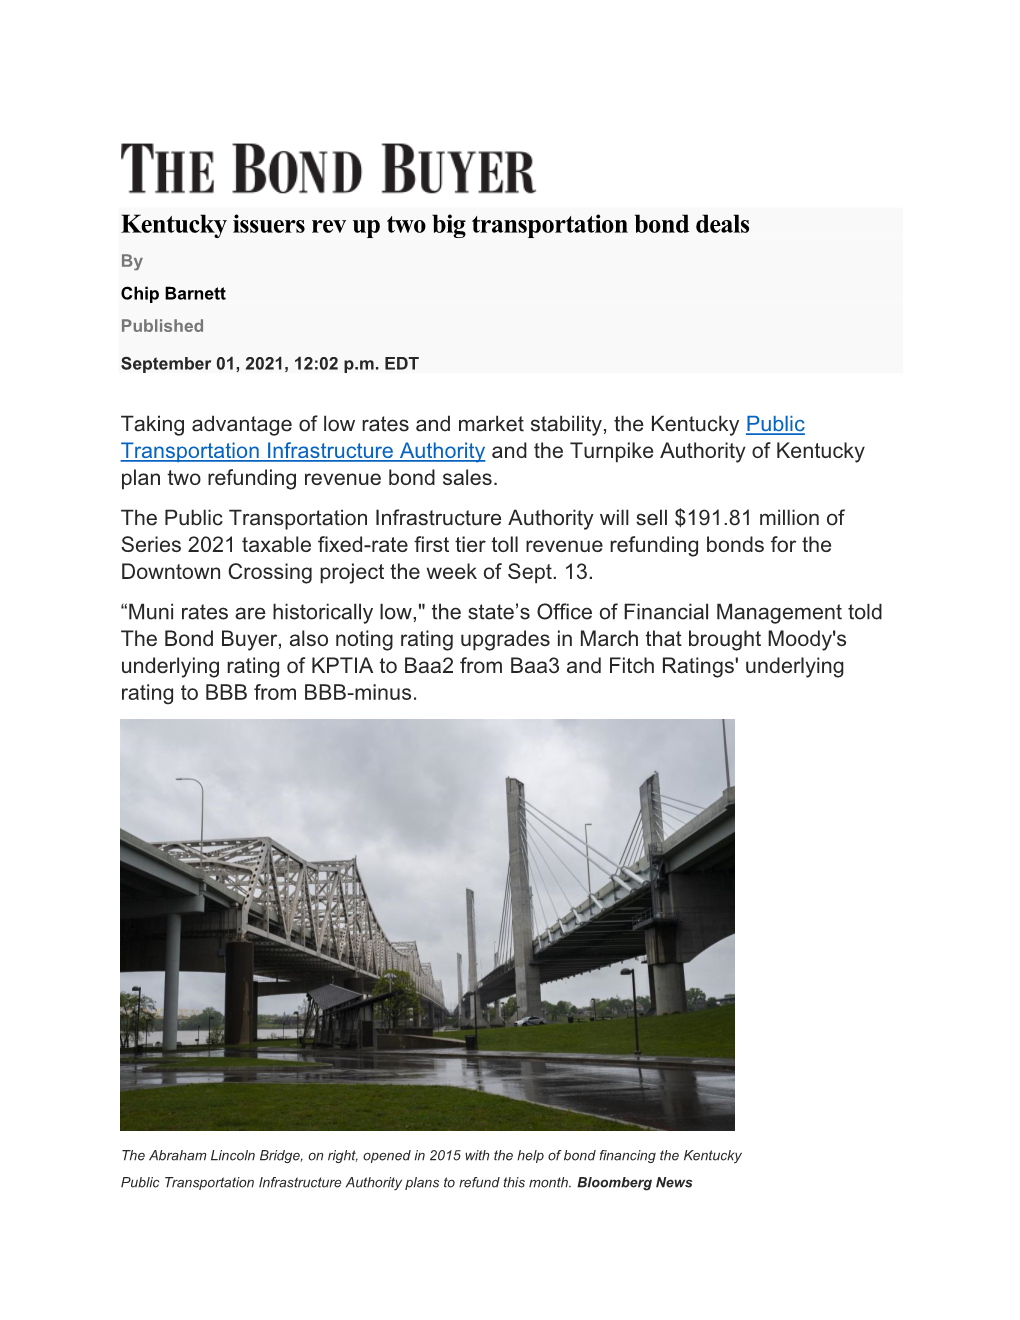 Kentucky Issuers Rev up Two Big Transportation Bond Deals by Chip Barnett Published